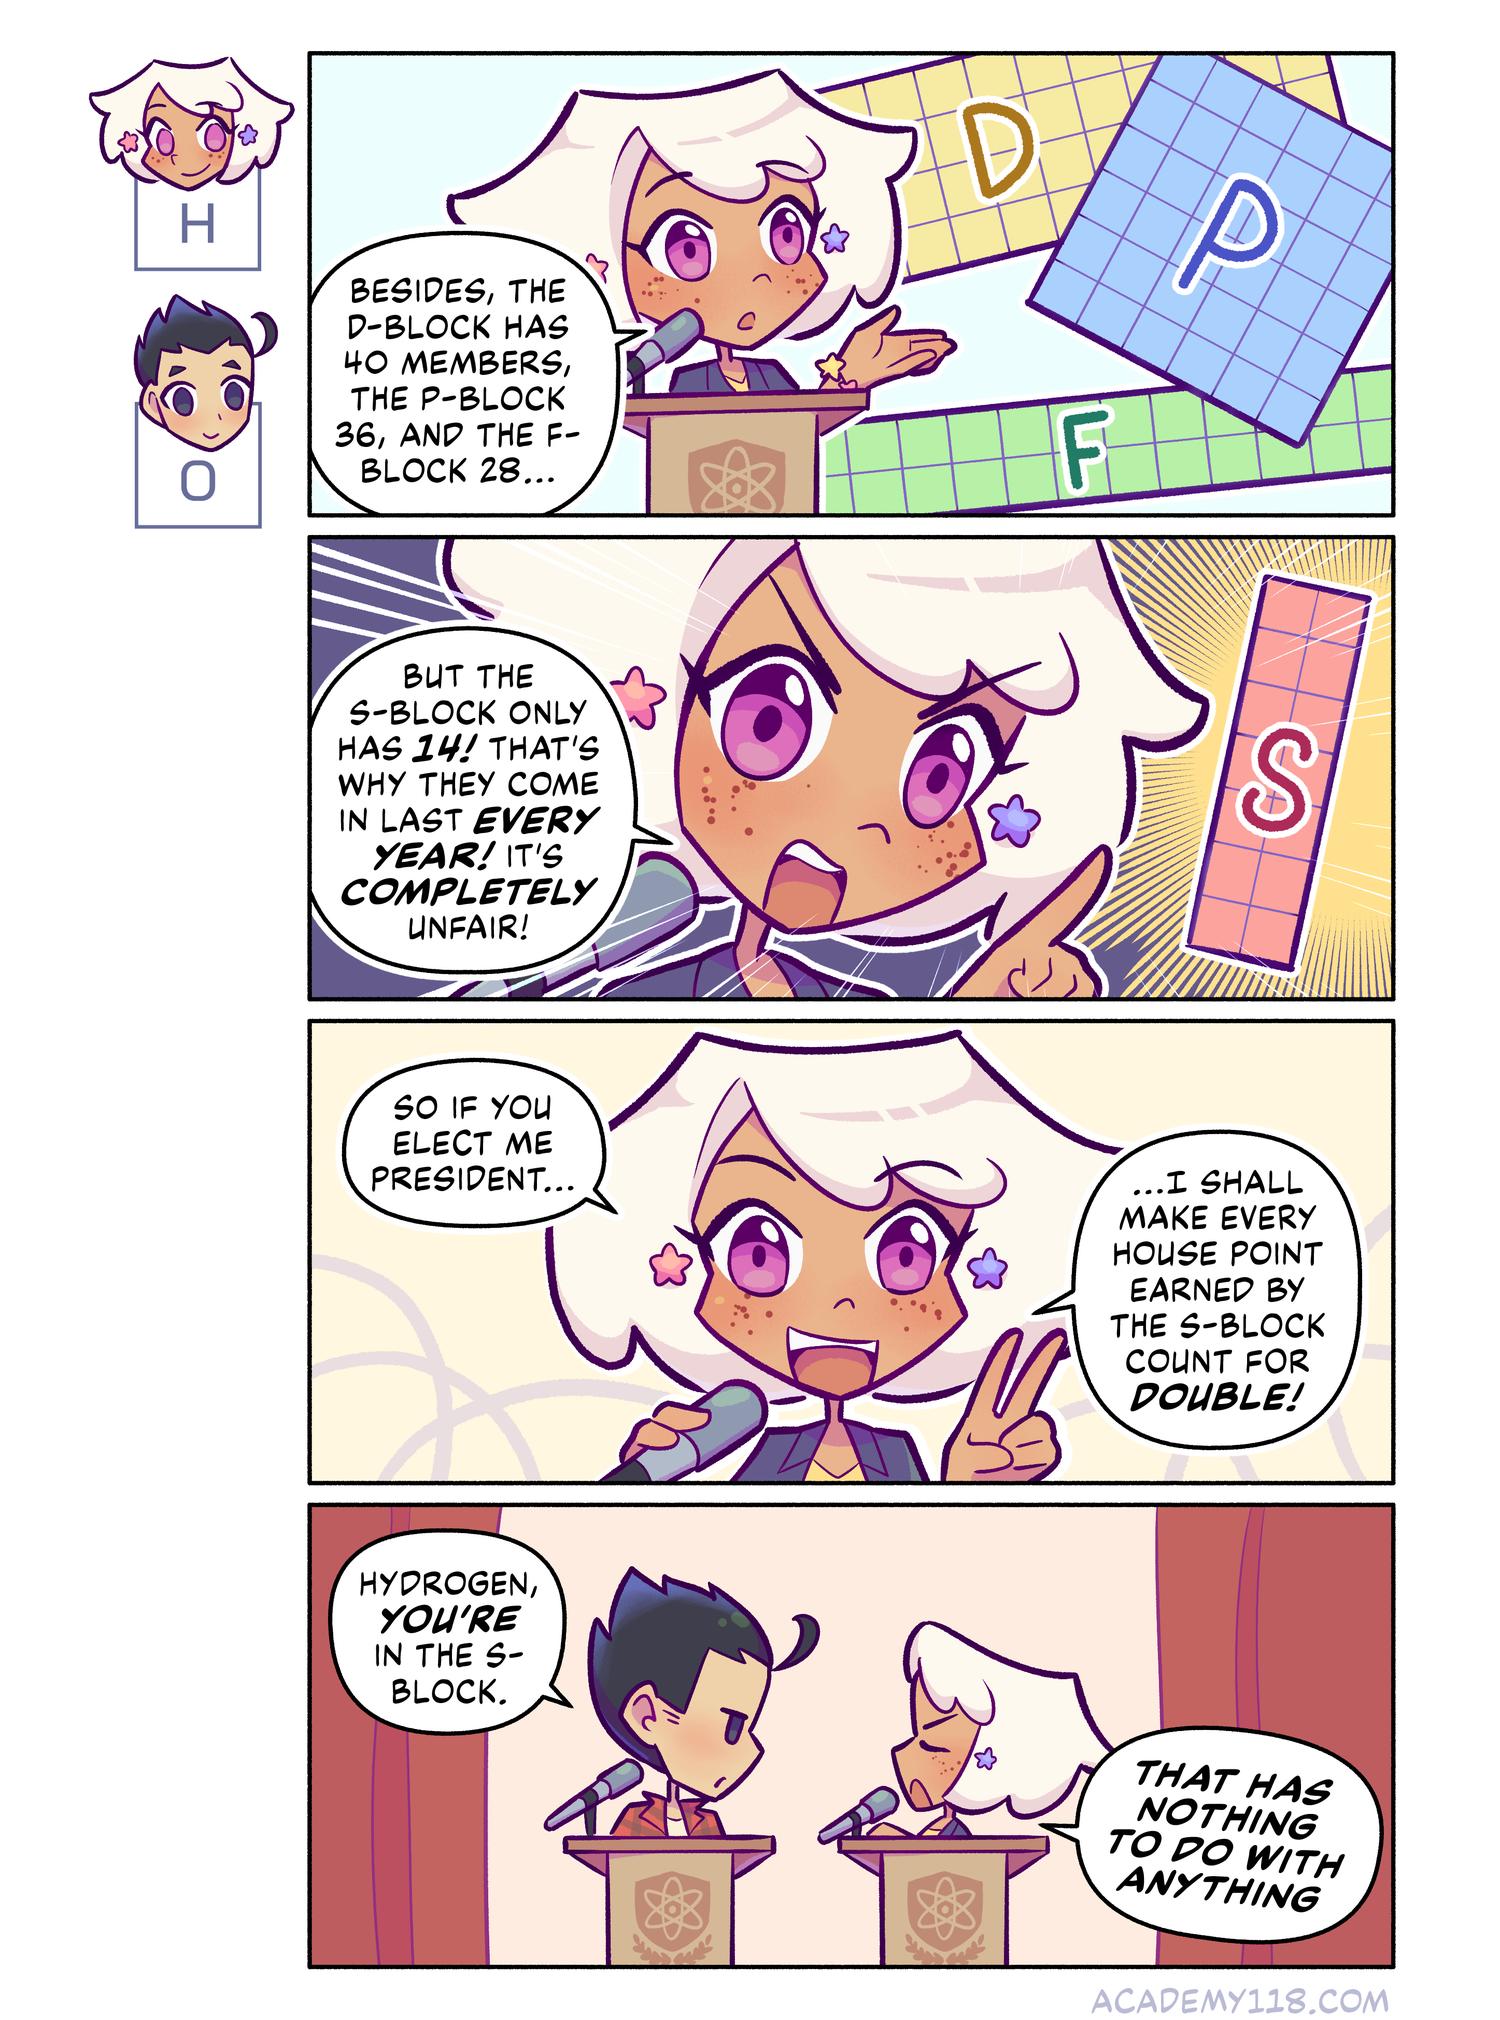 Hydrogen for President comic page 25